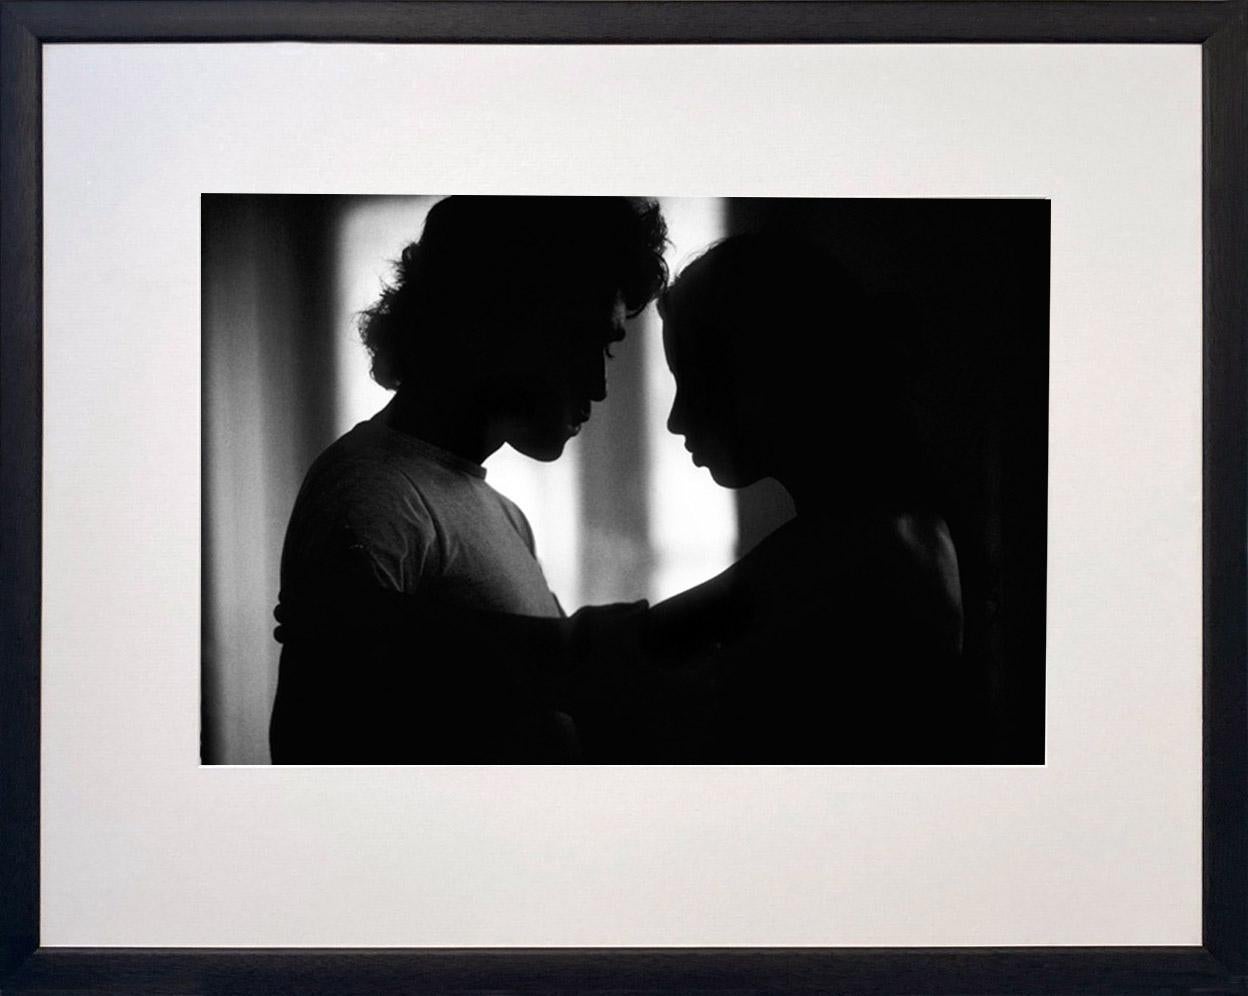 Lost in each others embrace…

James Sparshatt’s photographs of music and dance capture the emotion and intensity of people lost in the rhythm of the moment.

The work is available as silver gelatin and palladium platinum prints.

Baryta silver